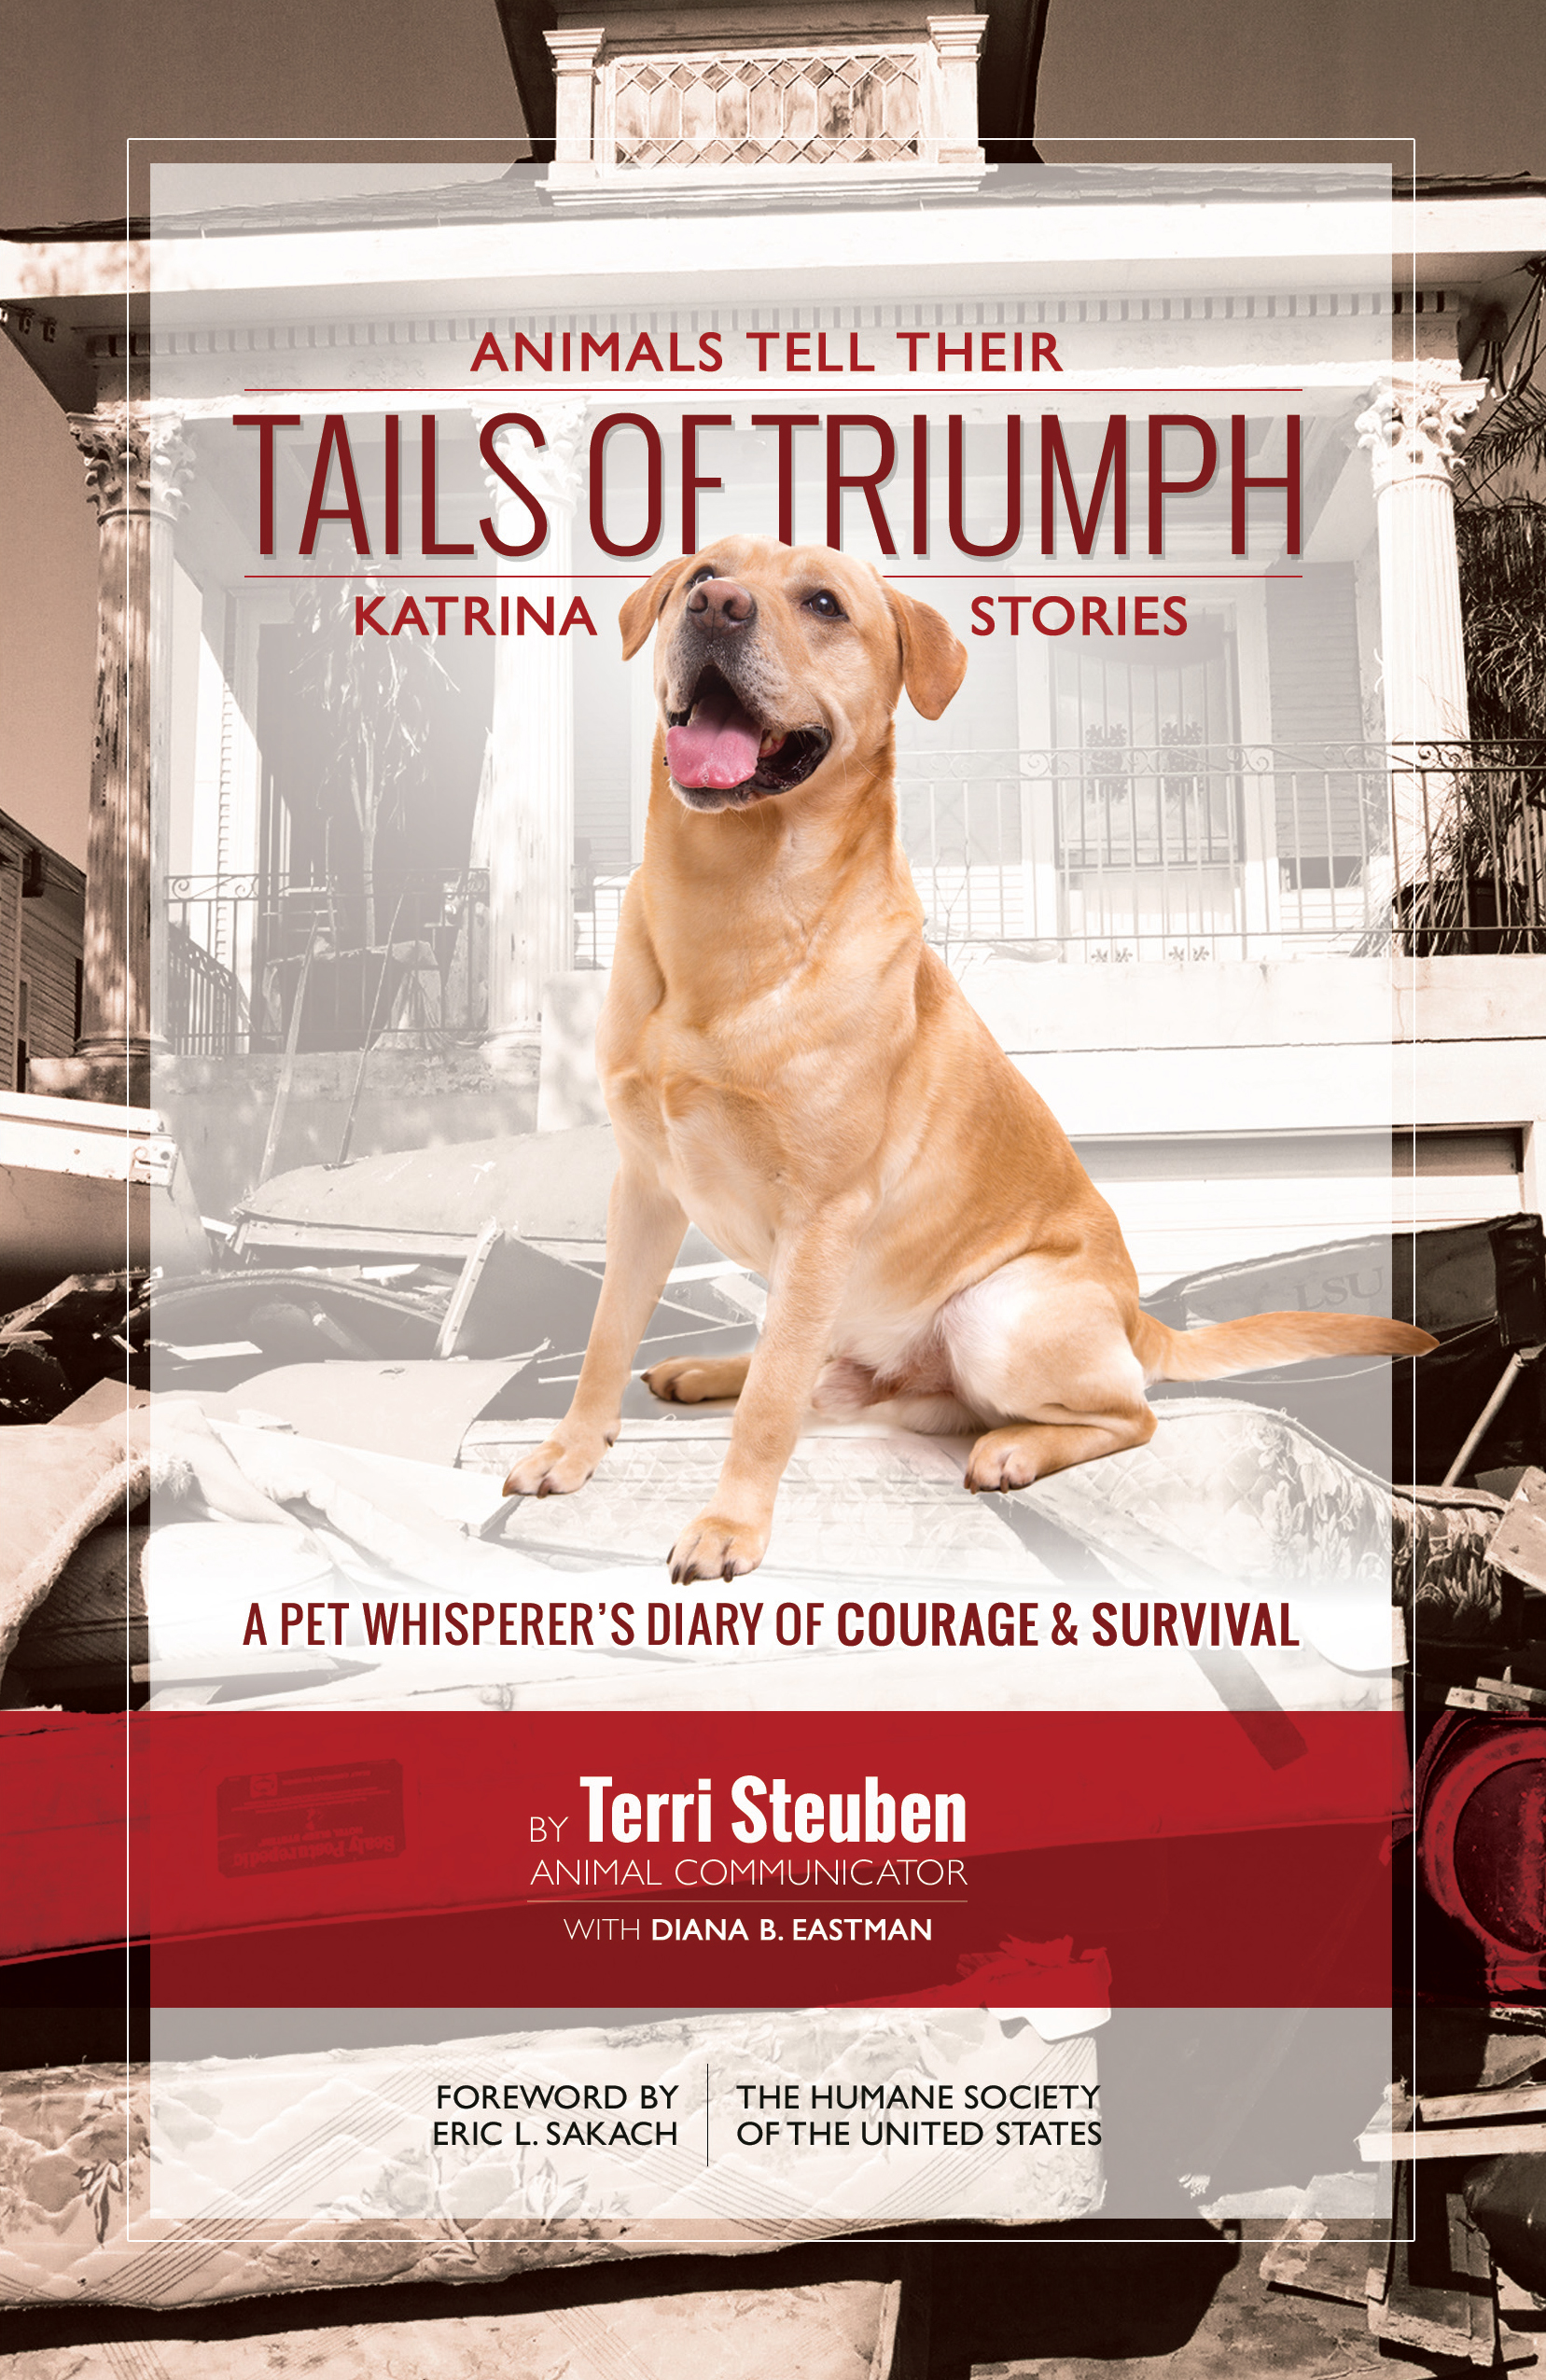 Tails of Triumph: Animals Tell Their Katrina Stories Animals features timeless tales of determination and survival by pet whisperer and HSUS disaster responder Terri Steuben.